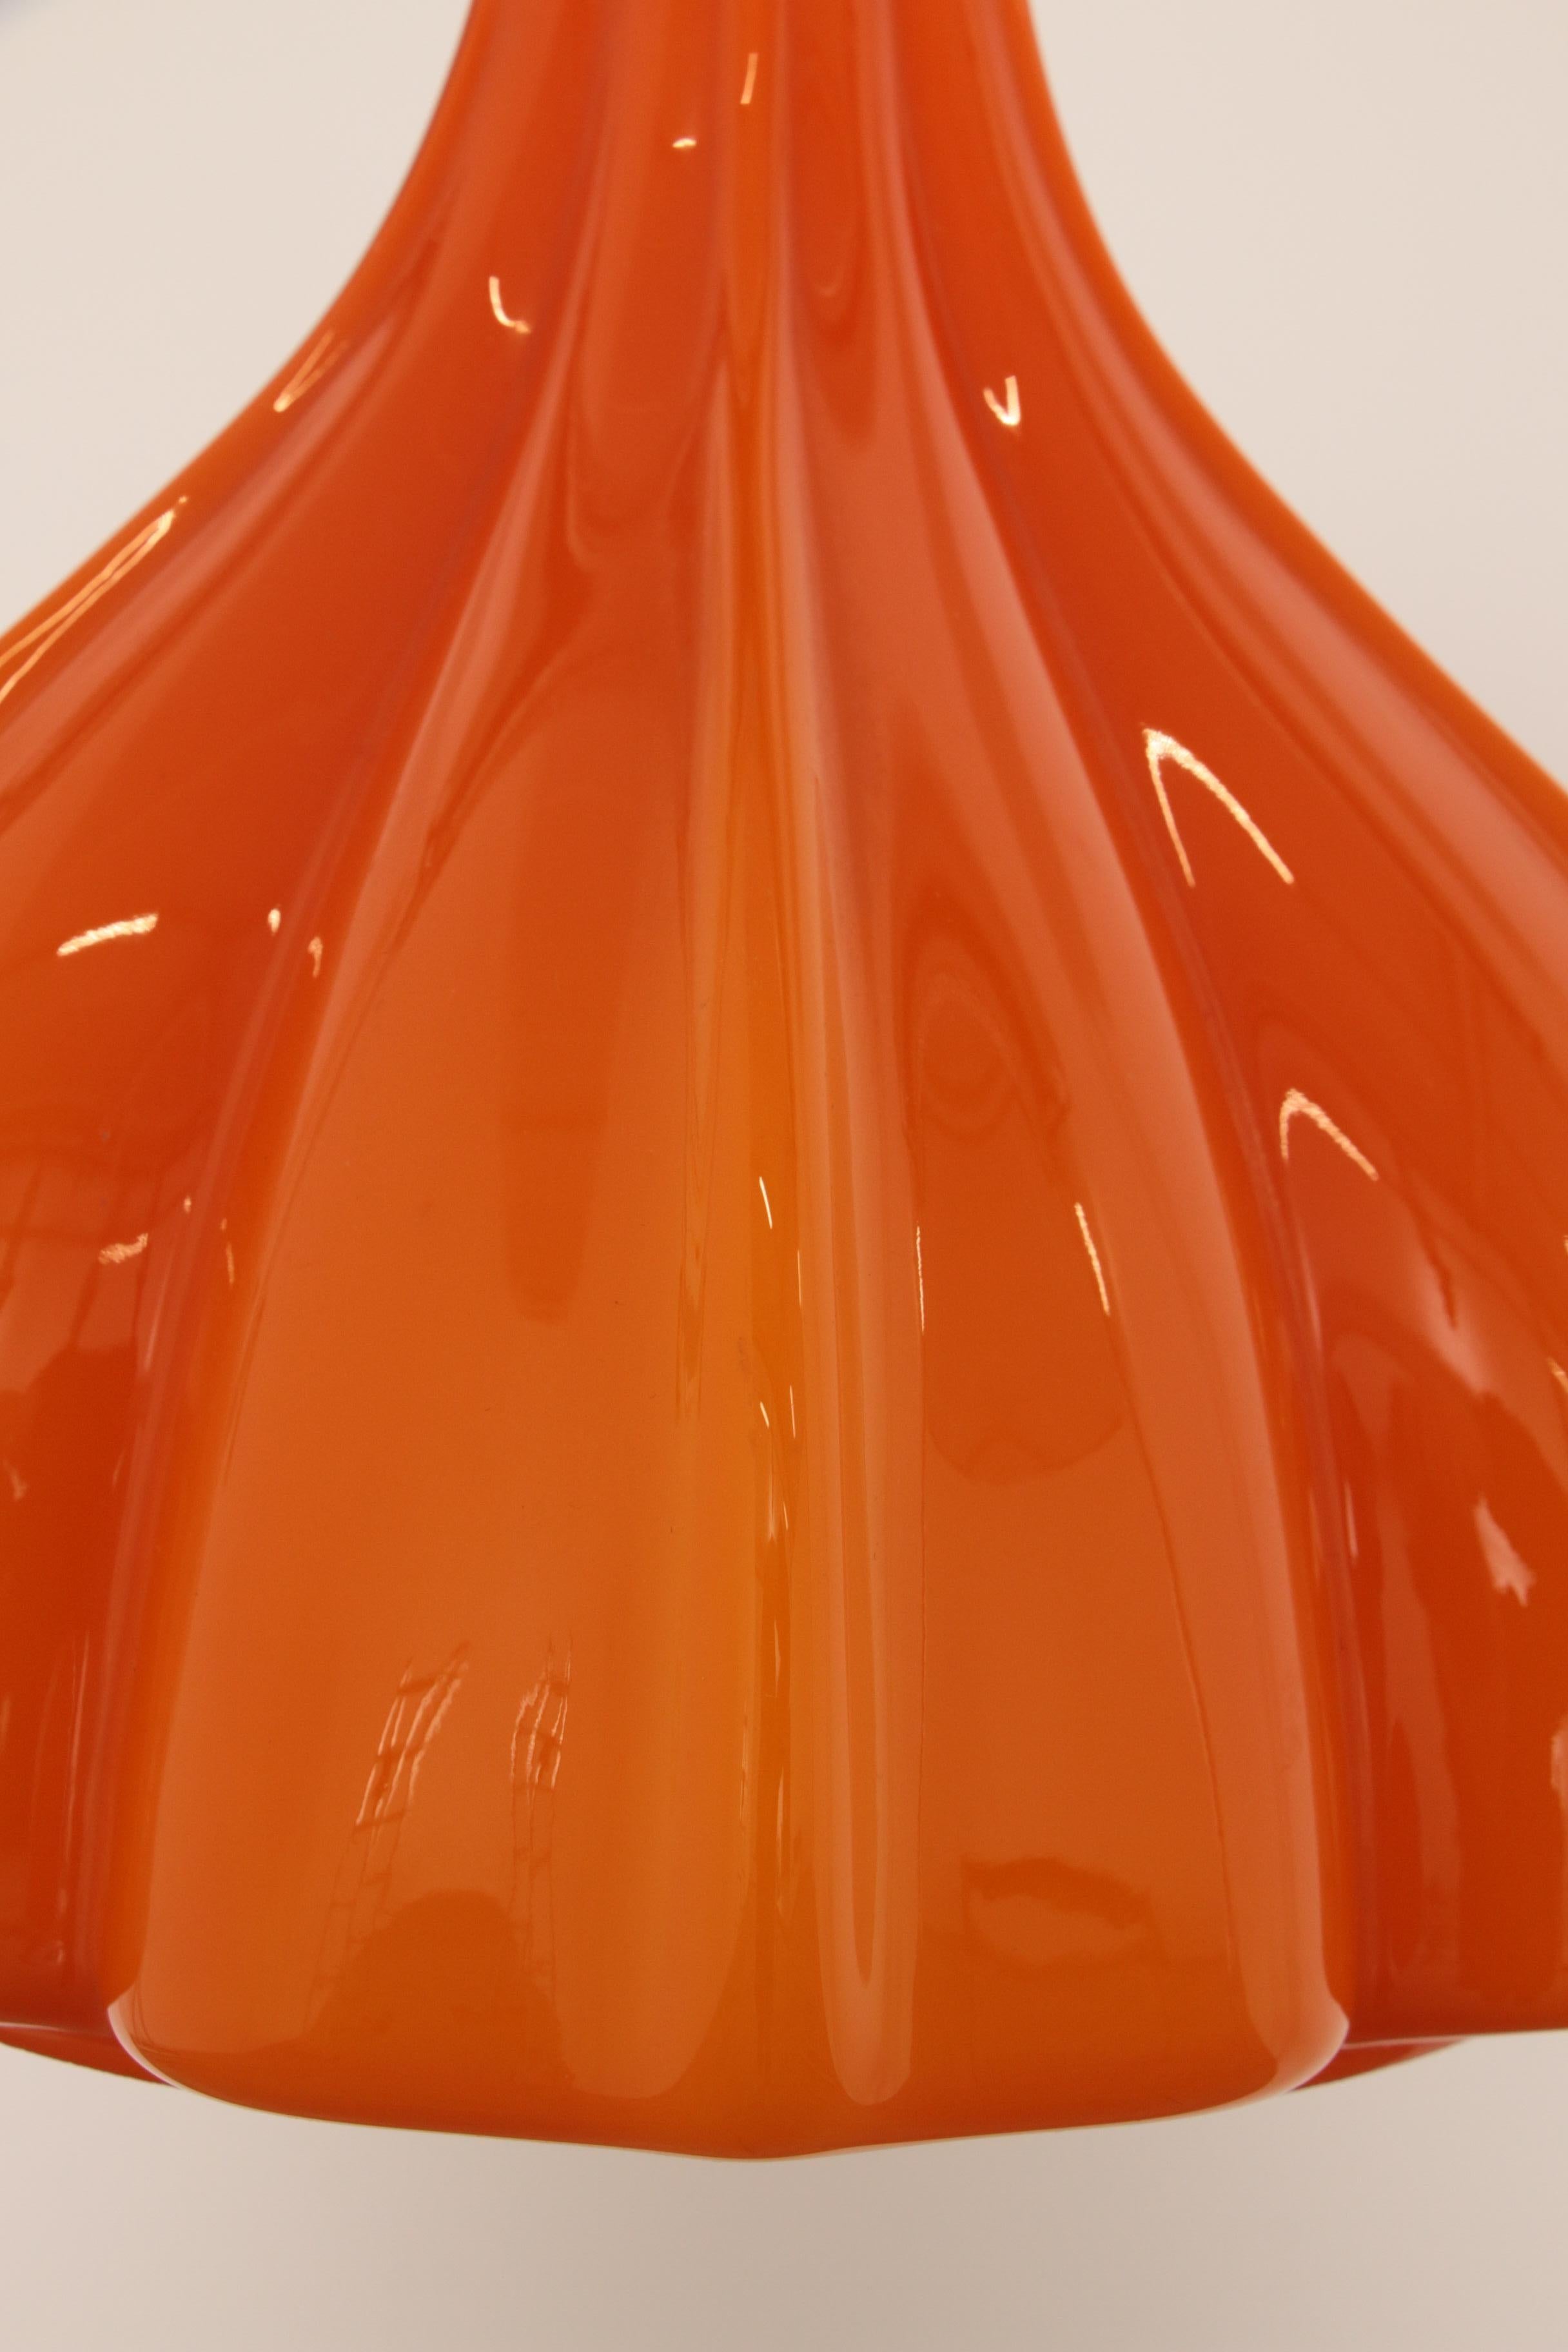 Vintage Orange Glass Pendant Lamp by Peill and Putzler, 1960 For Sale 5